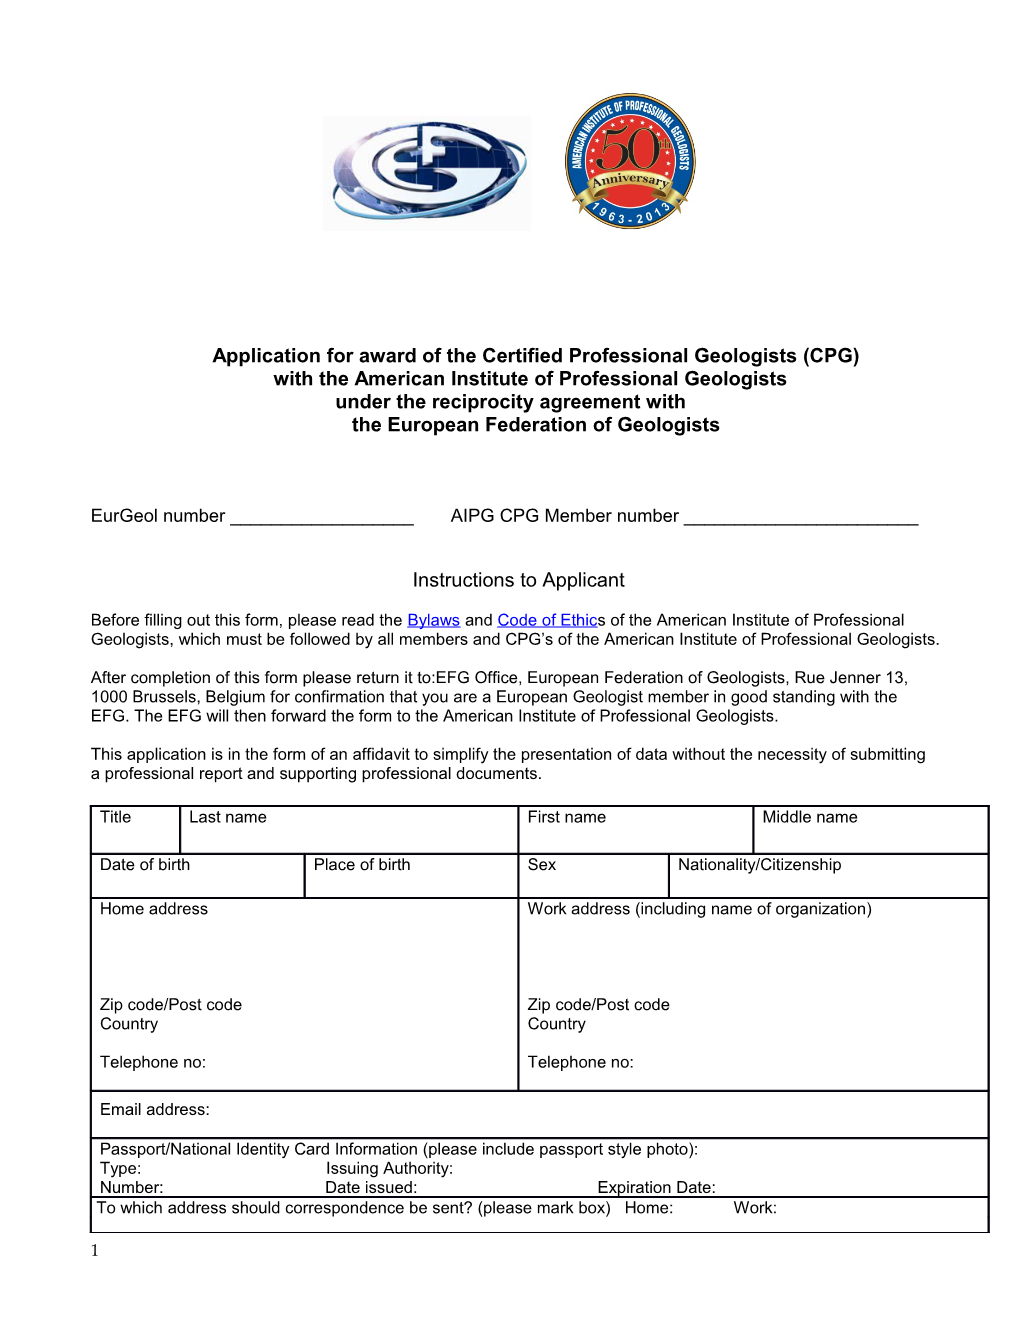 Application for Award of the Certified Professional Geologists (CPG)